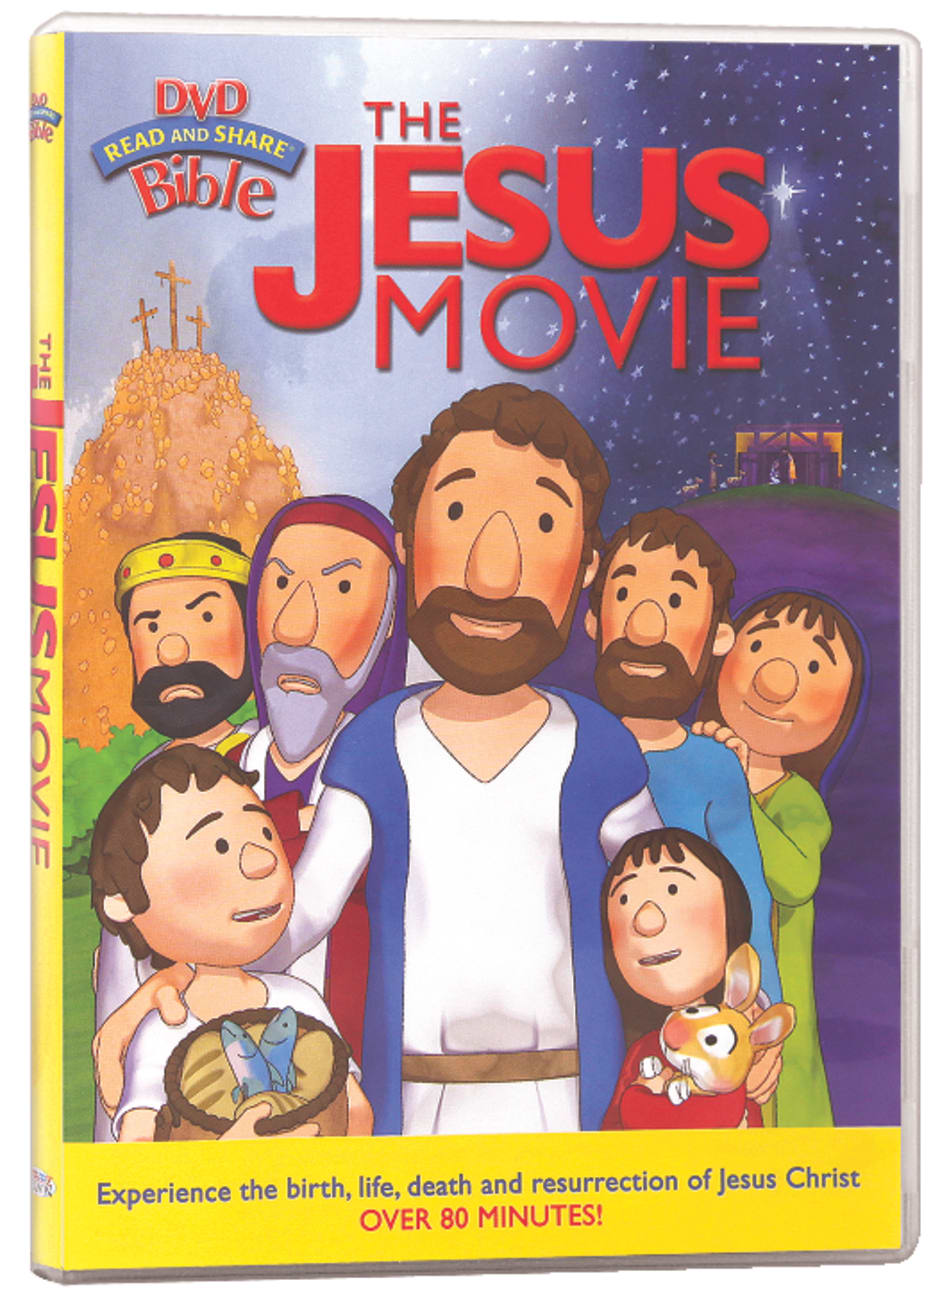 The Jesus Movie (Read And Share Dvd Series) DVD